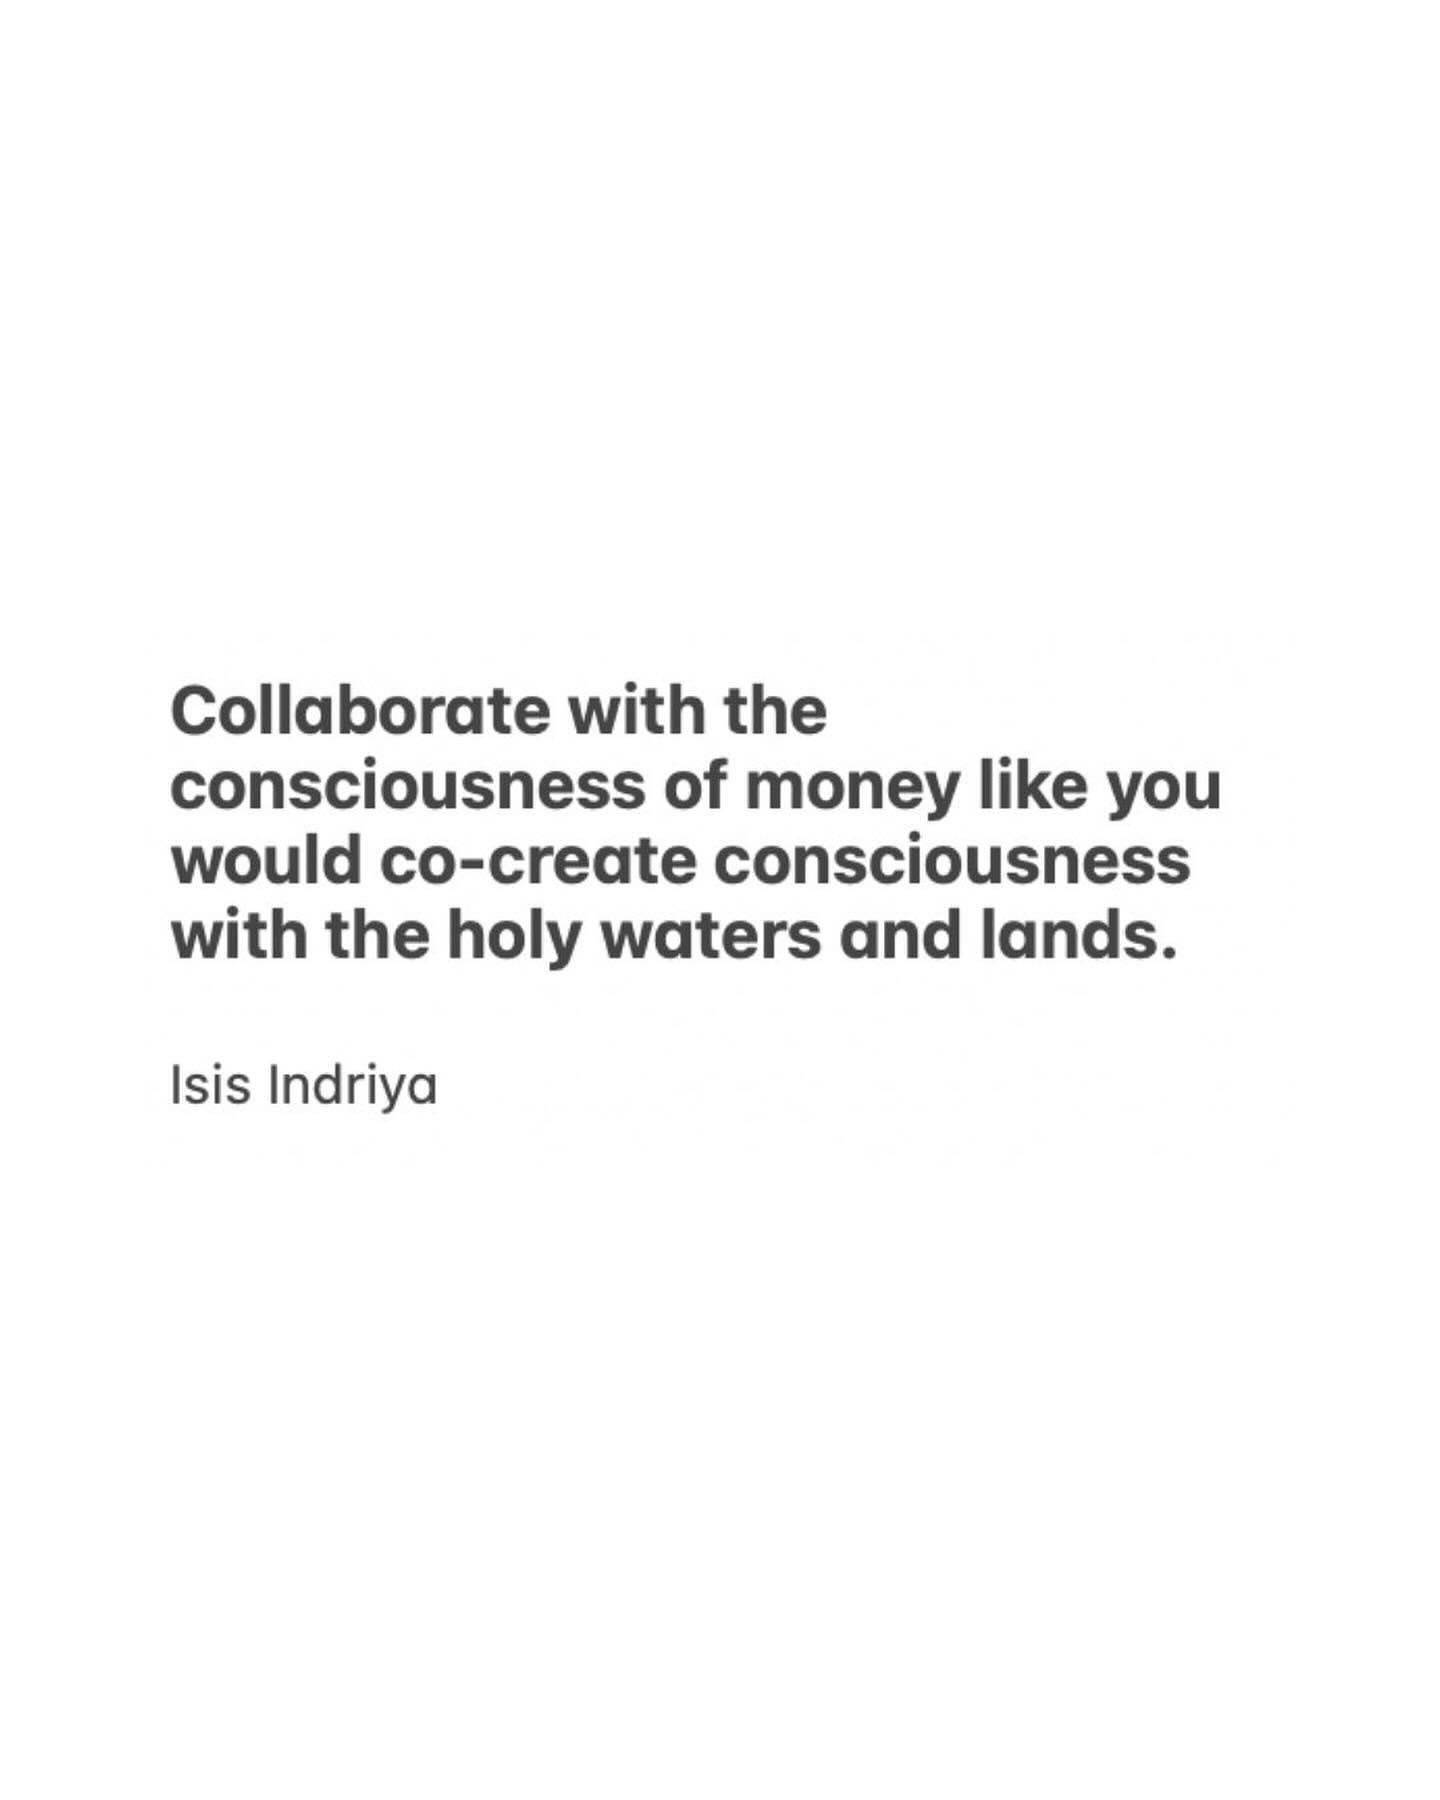 Record keeping for @isis_indriya &lsquo;s consultation with The Oracle board in March. 

Pay attention to the May timelines. 
Cultivate your relations with resource. 
Mend karmic threads with money.

Turn everything you have learned into medicine.

T